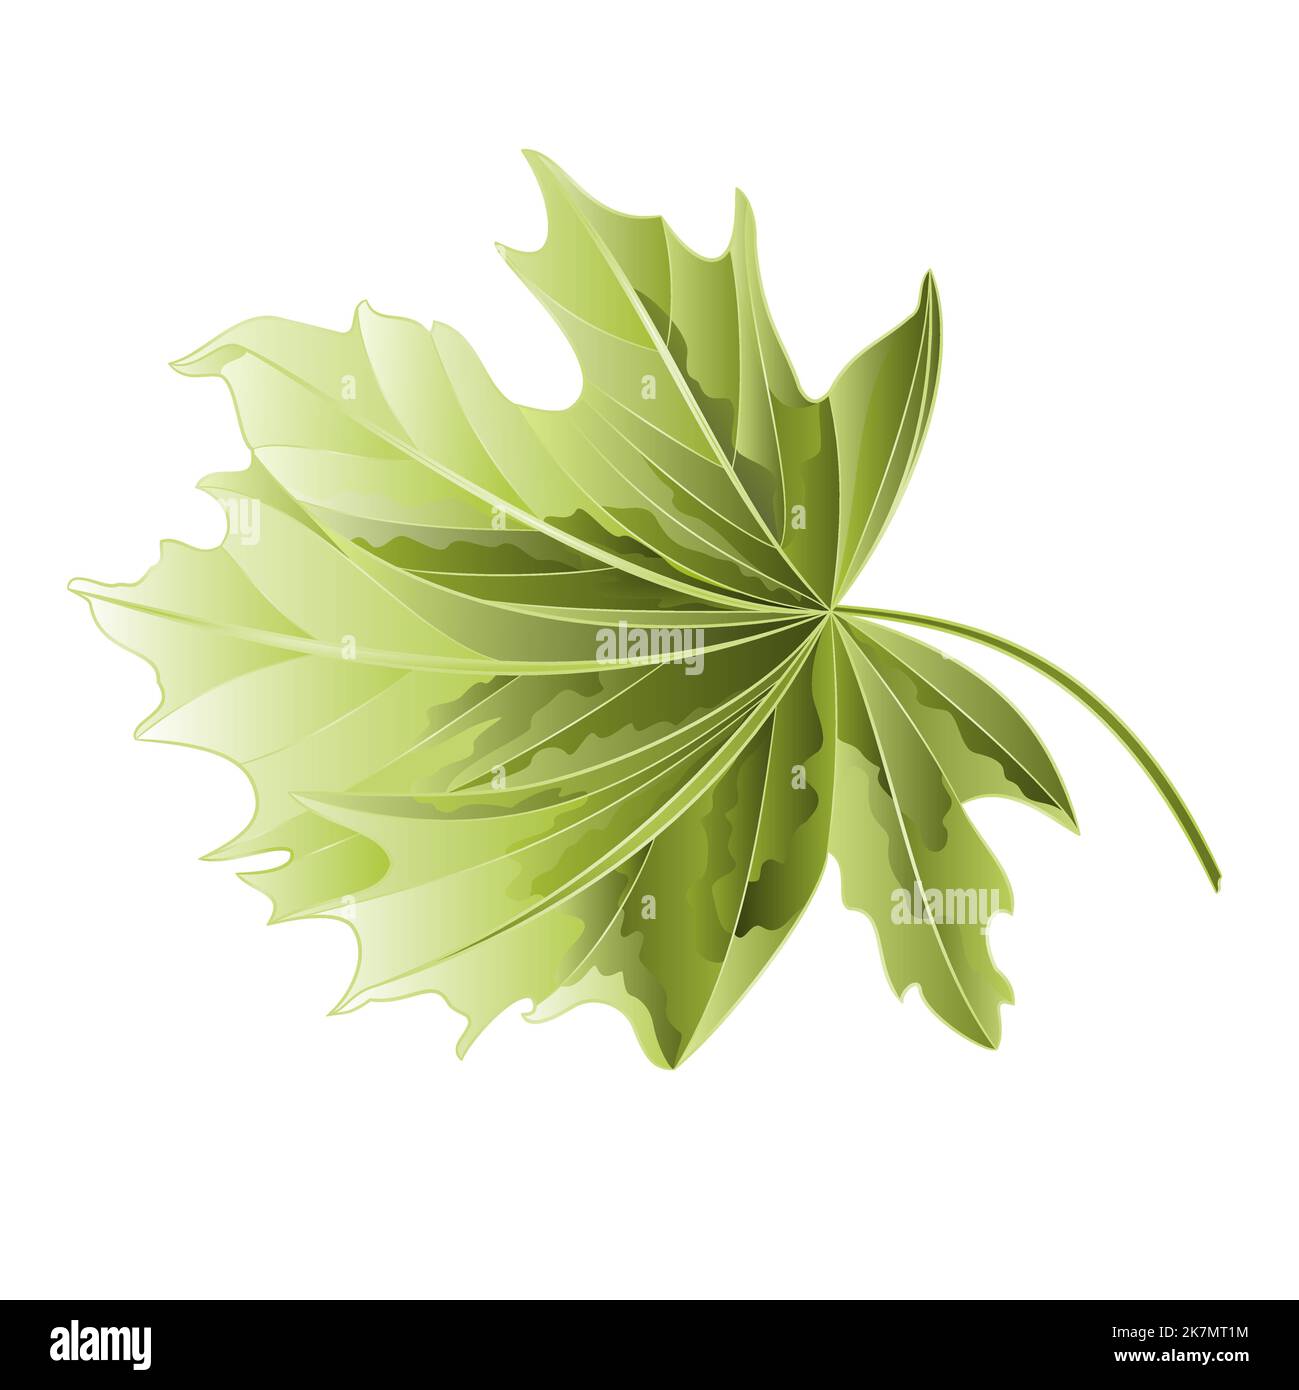 Maple tree leaf on a white background vector illustration Stock Vector